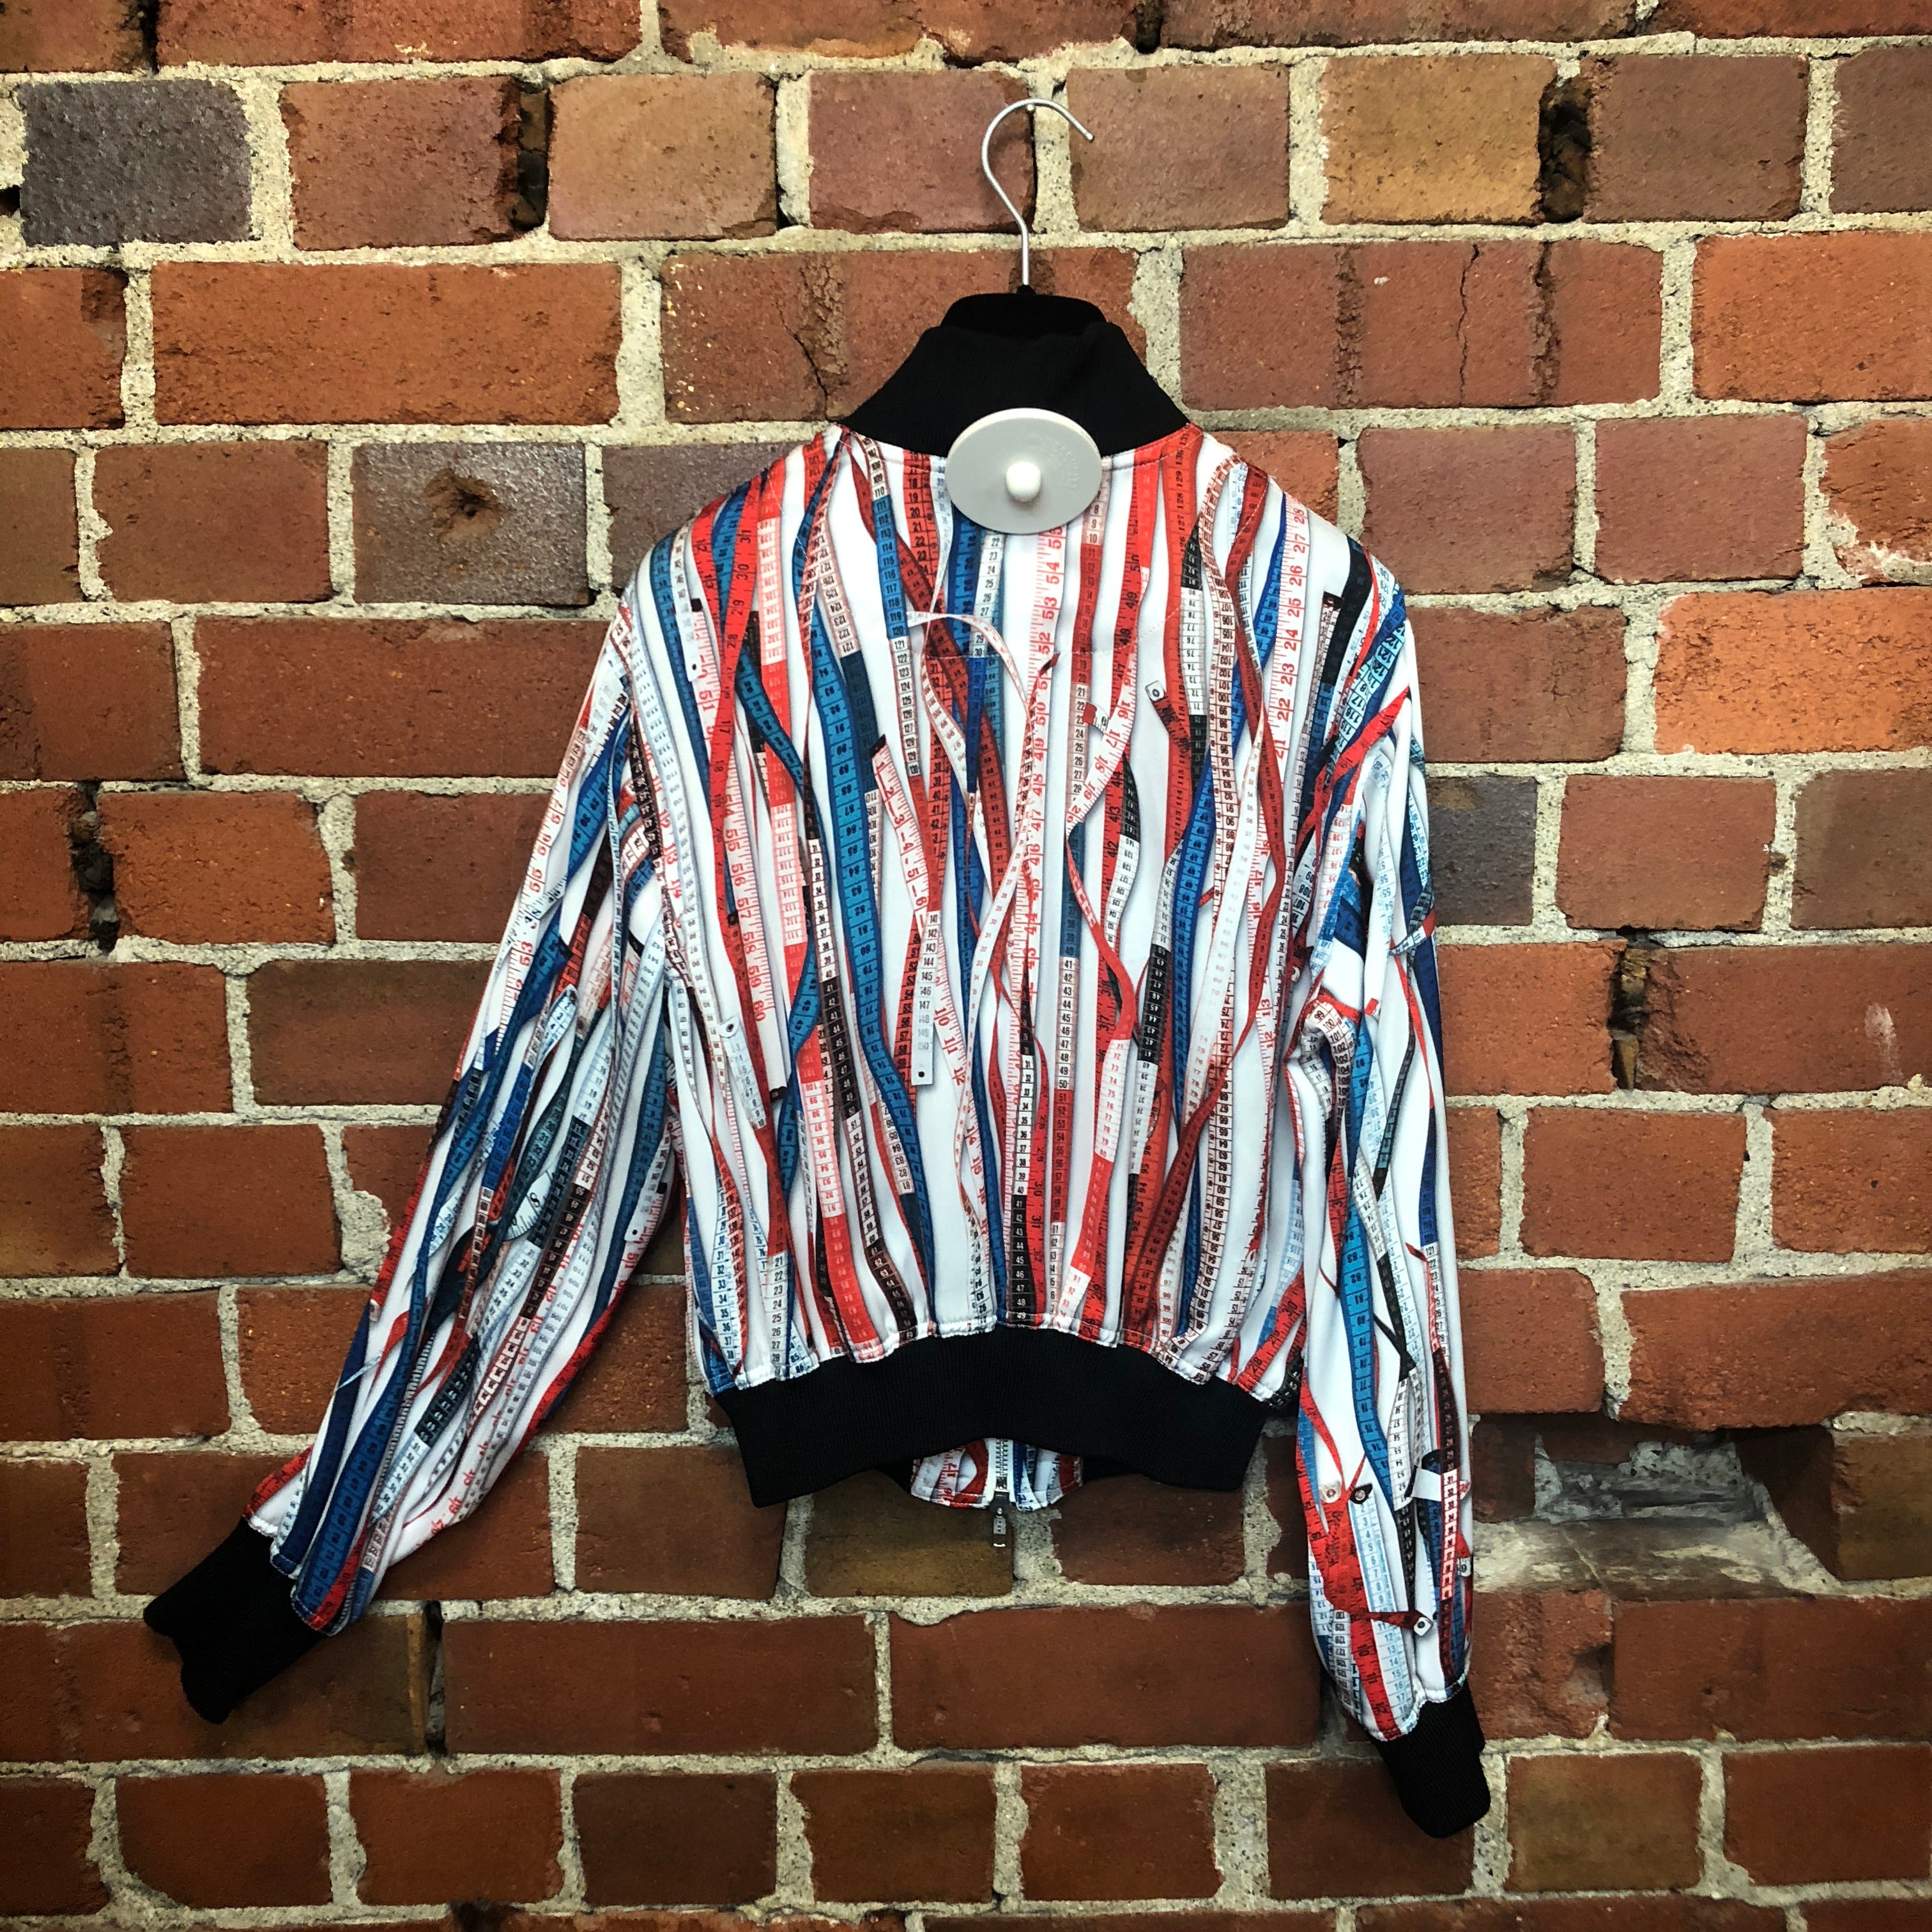 GAULTIER measuring tape print collab bomber jacket